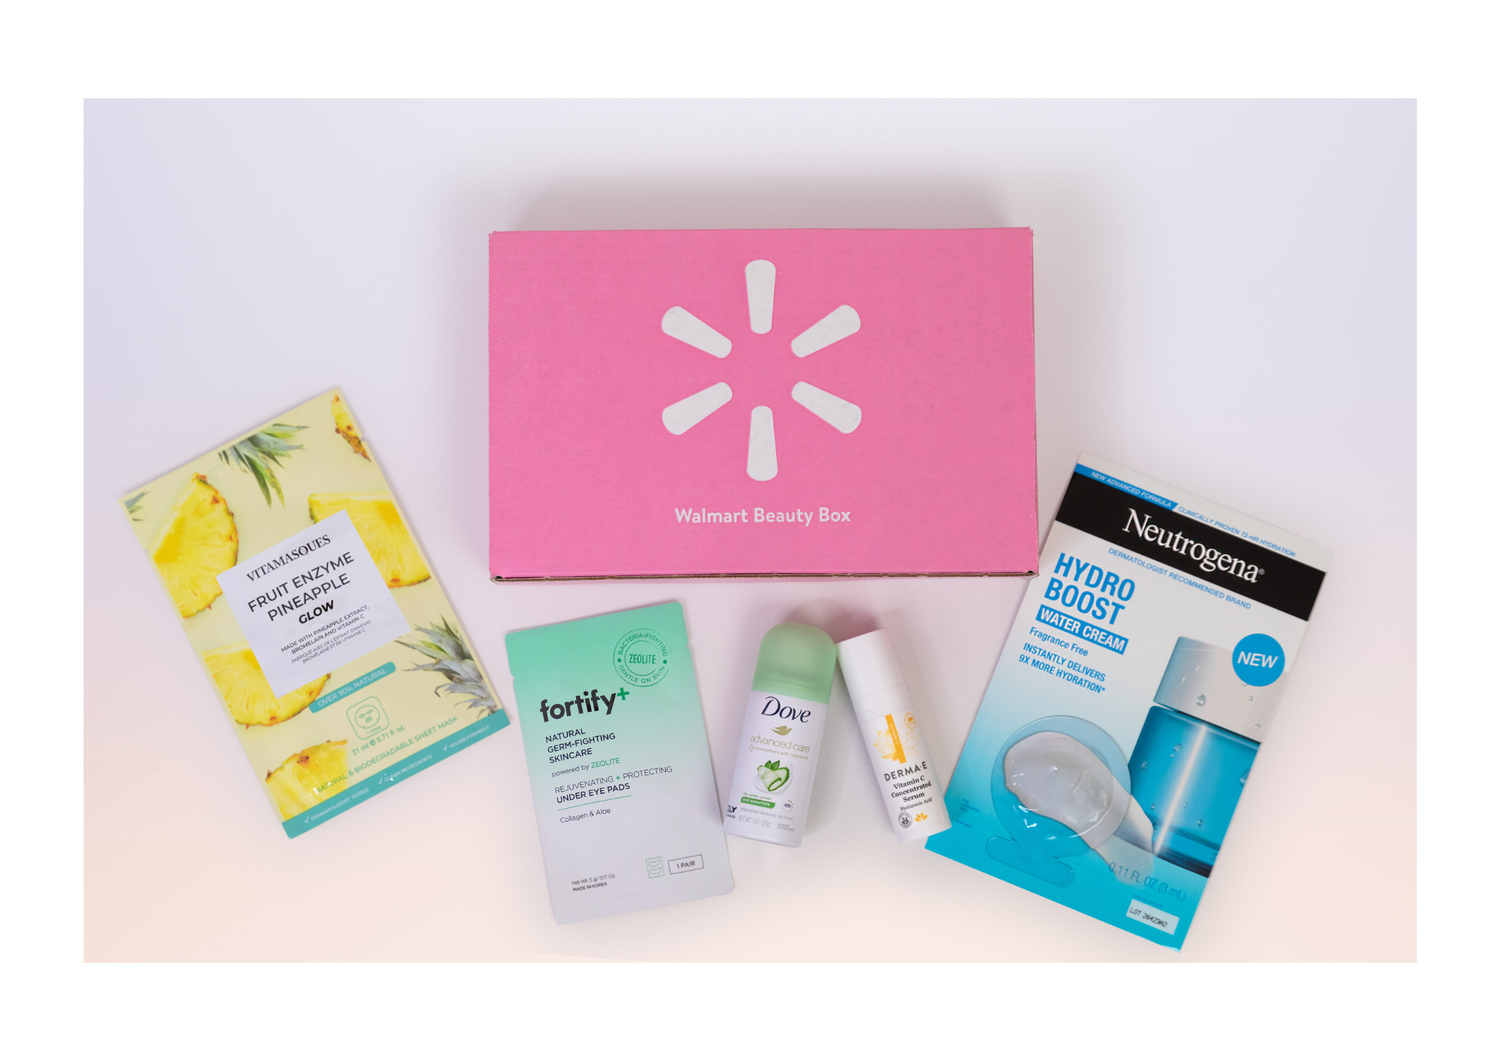 The Spring 2024 Walmart Beauty Box is shown along with some of the season's featured products from Vitamasques, Dove, Neutrogena, and more.